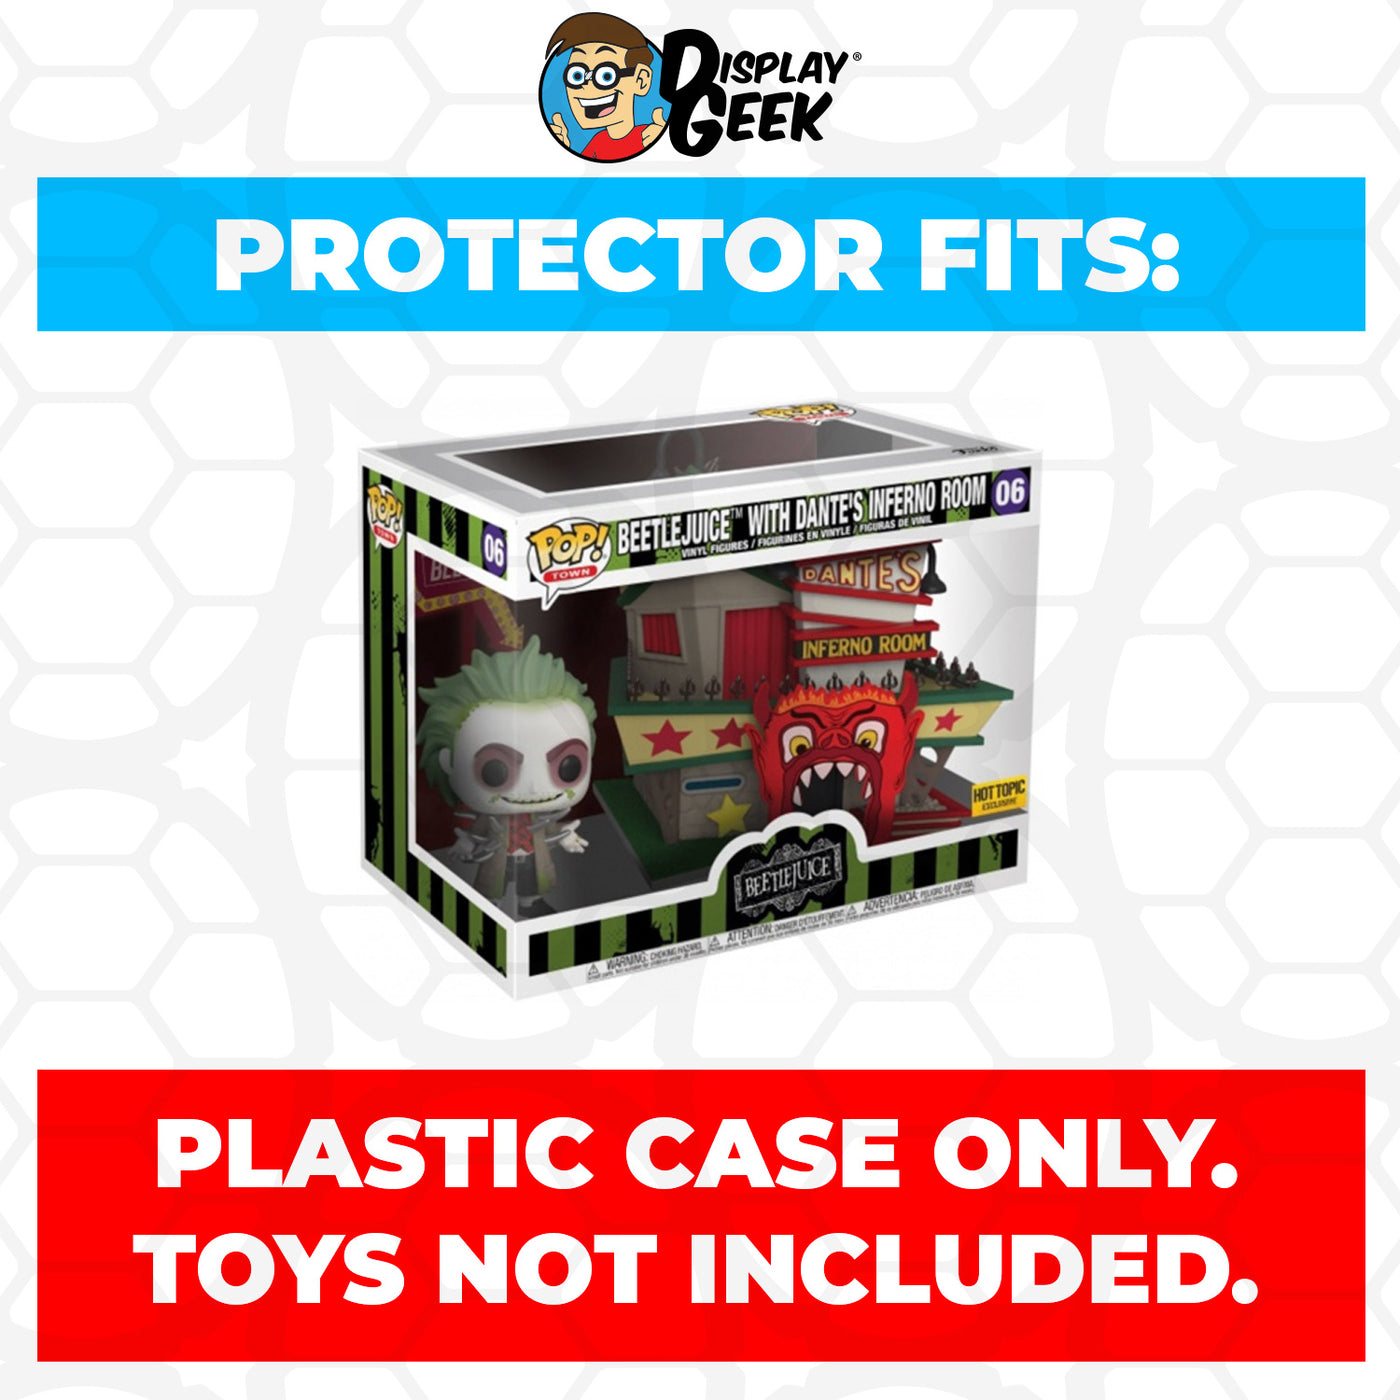 Pop Protector for Beetlejuice with Dante's Inferno Room #06 Funko Pop Town on The Protector Guide App by Display Geek